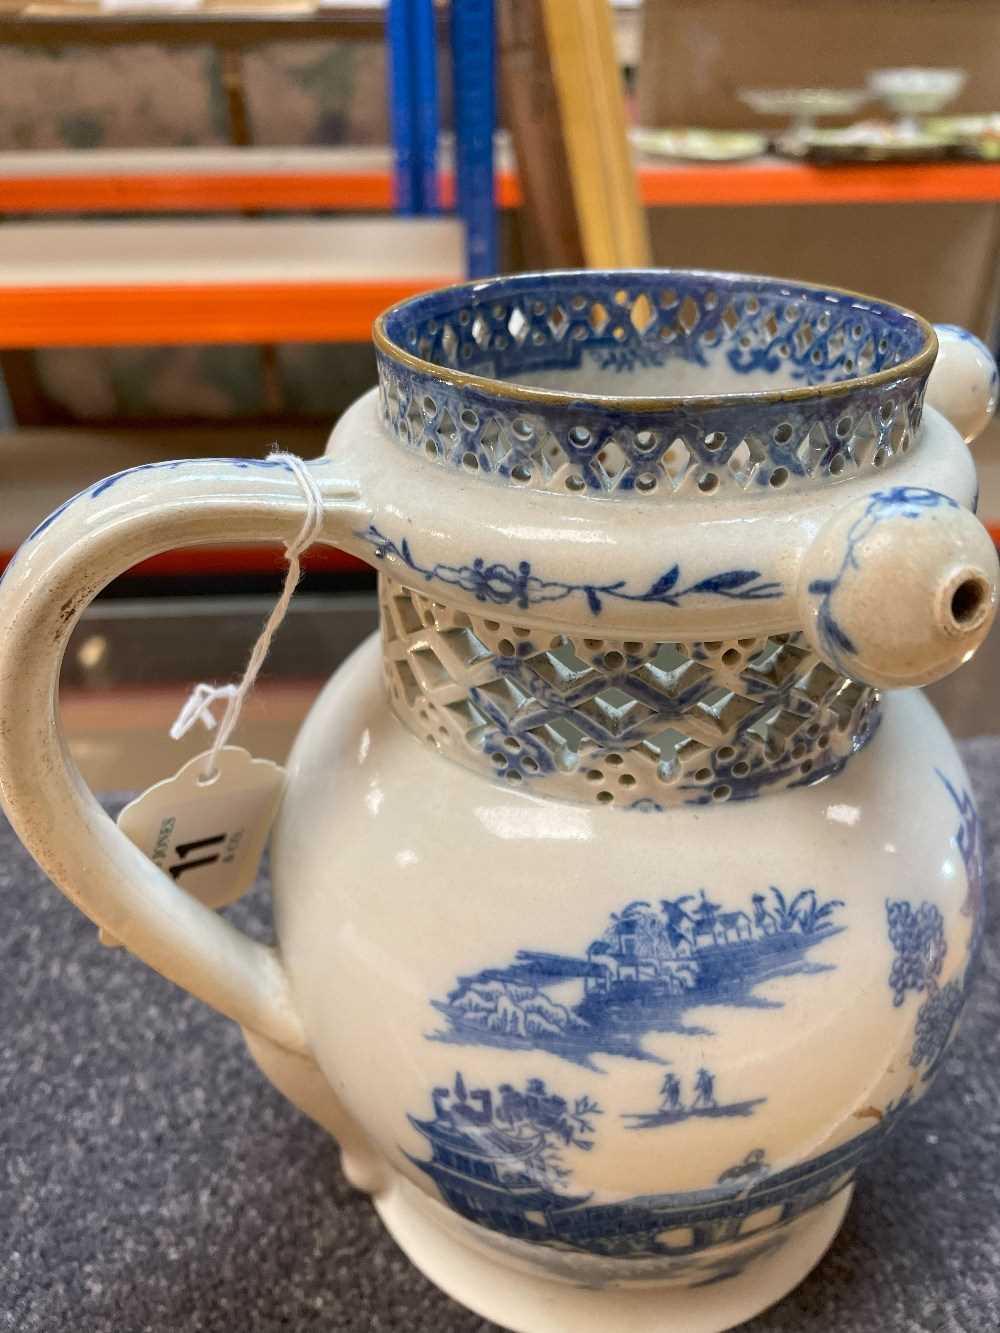 SWANSEA CAMBRIAN PEARLWARE PUZZLE JUG circa 1810, printed in blue with the 'Longbridge' pattern, - Image 4 of 20